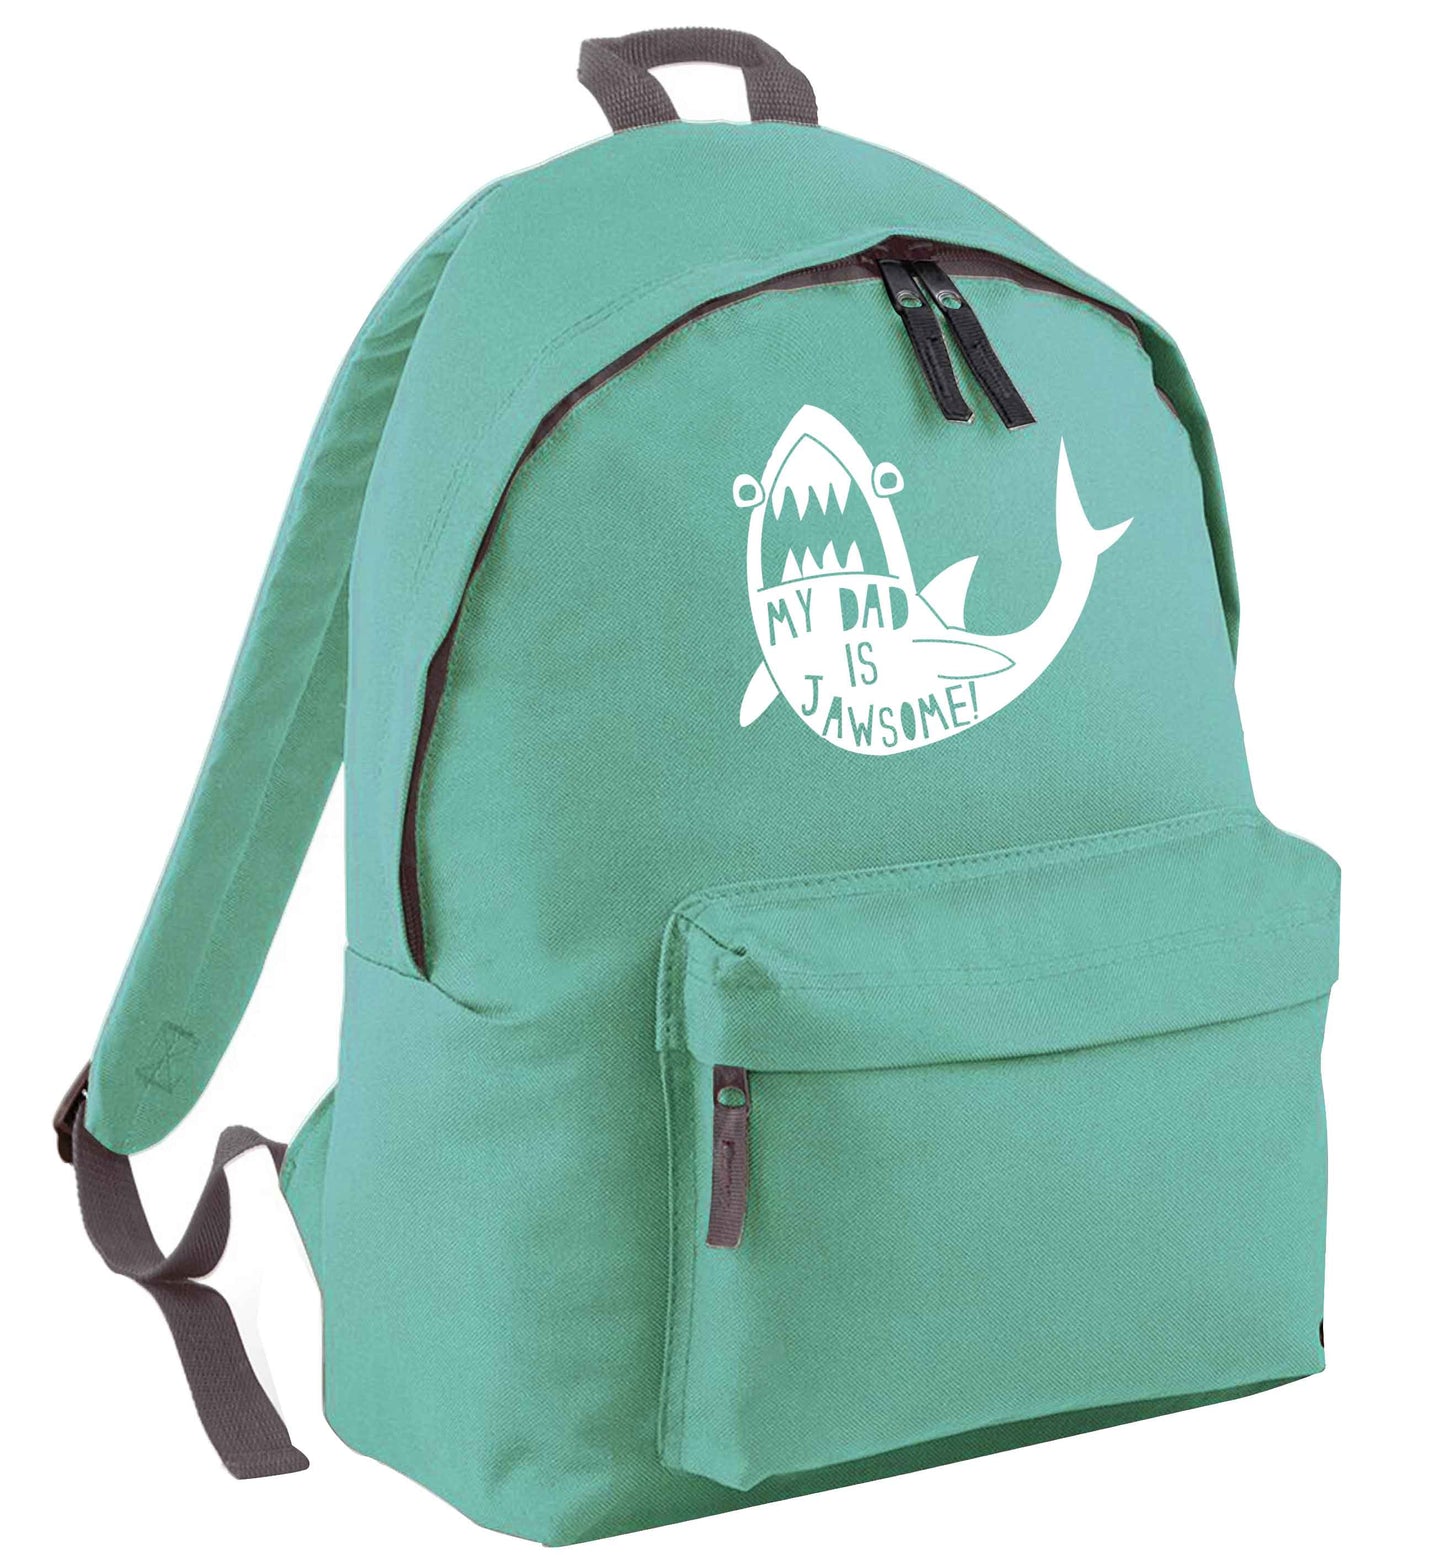 My Dad is jawsome mint adults backpack